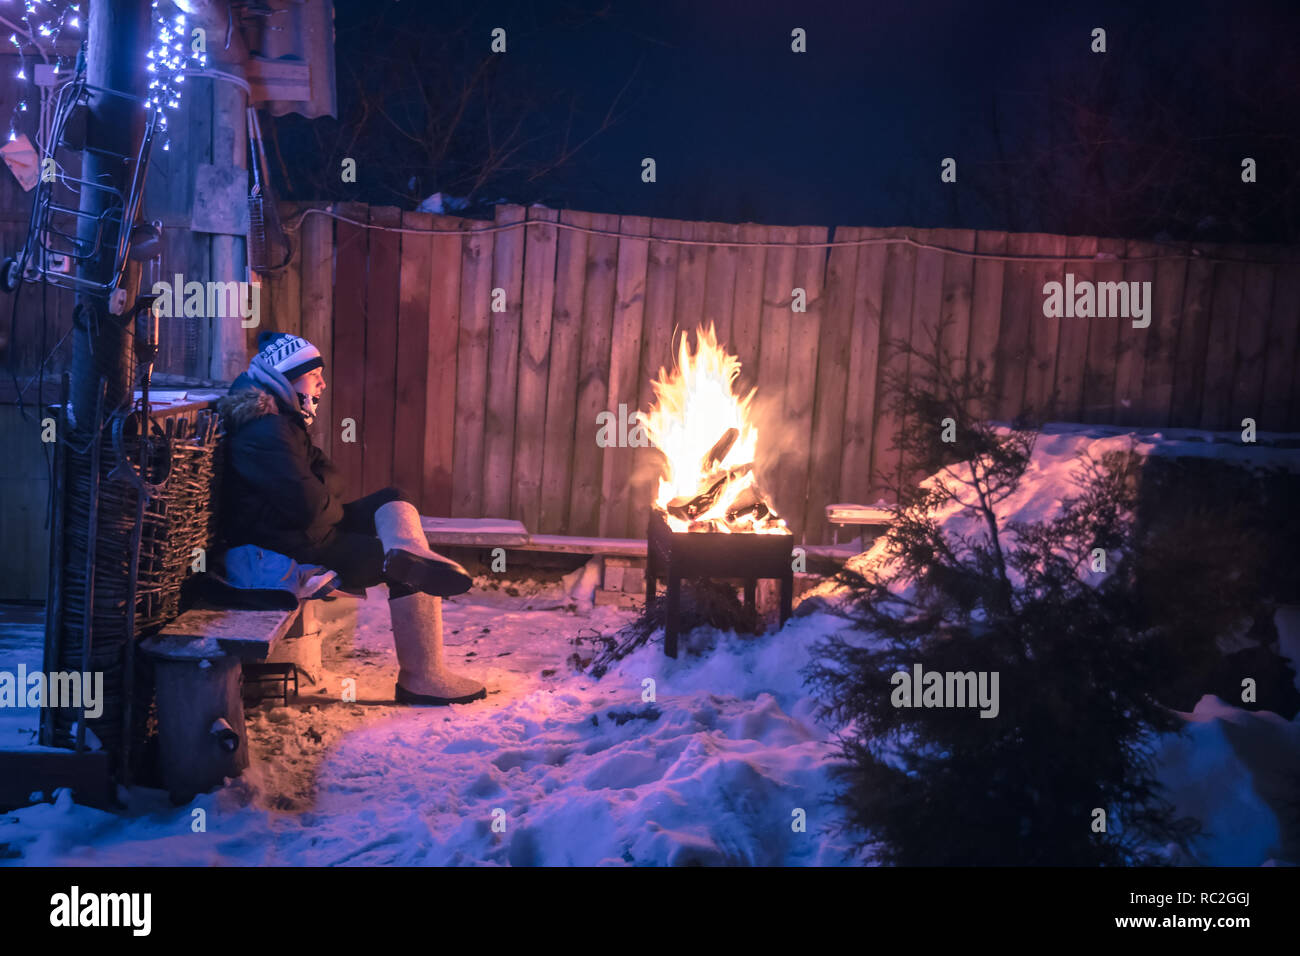 Winter thoughtful lonely teenager boys missing and getting warm at fire in night snowy countryside Stock Photo